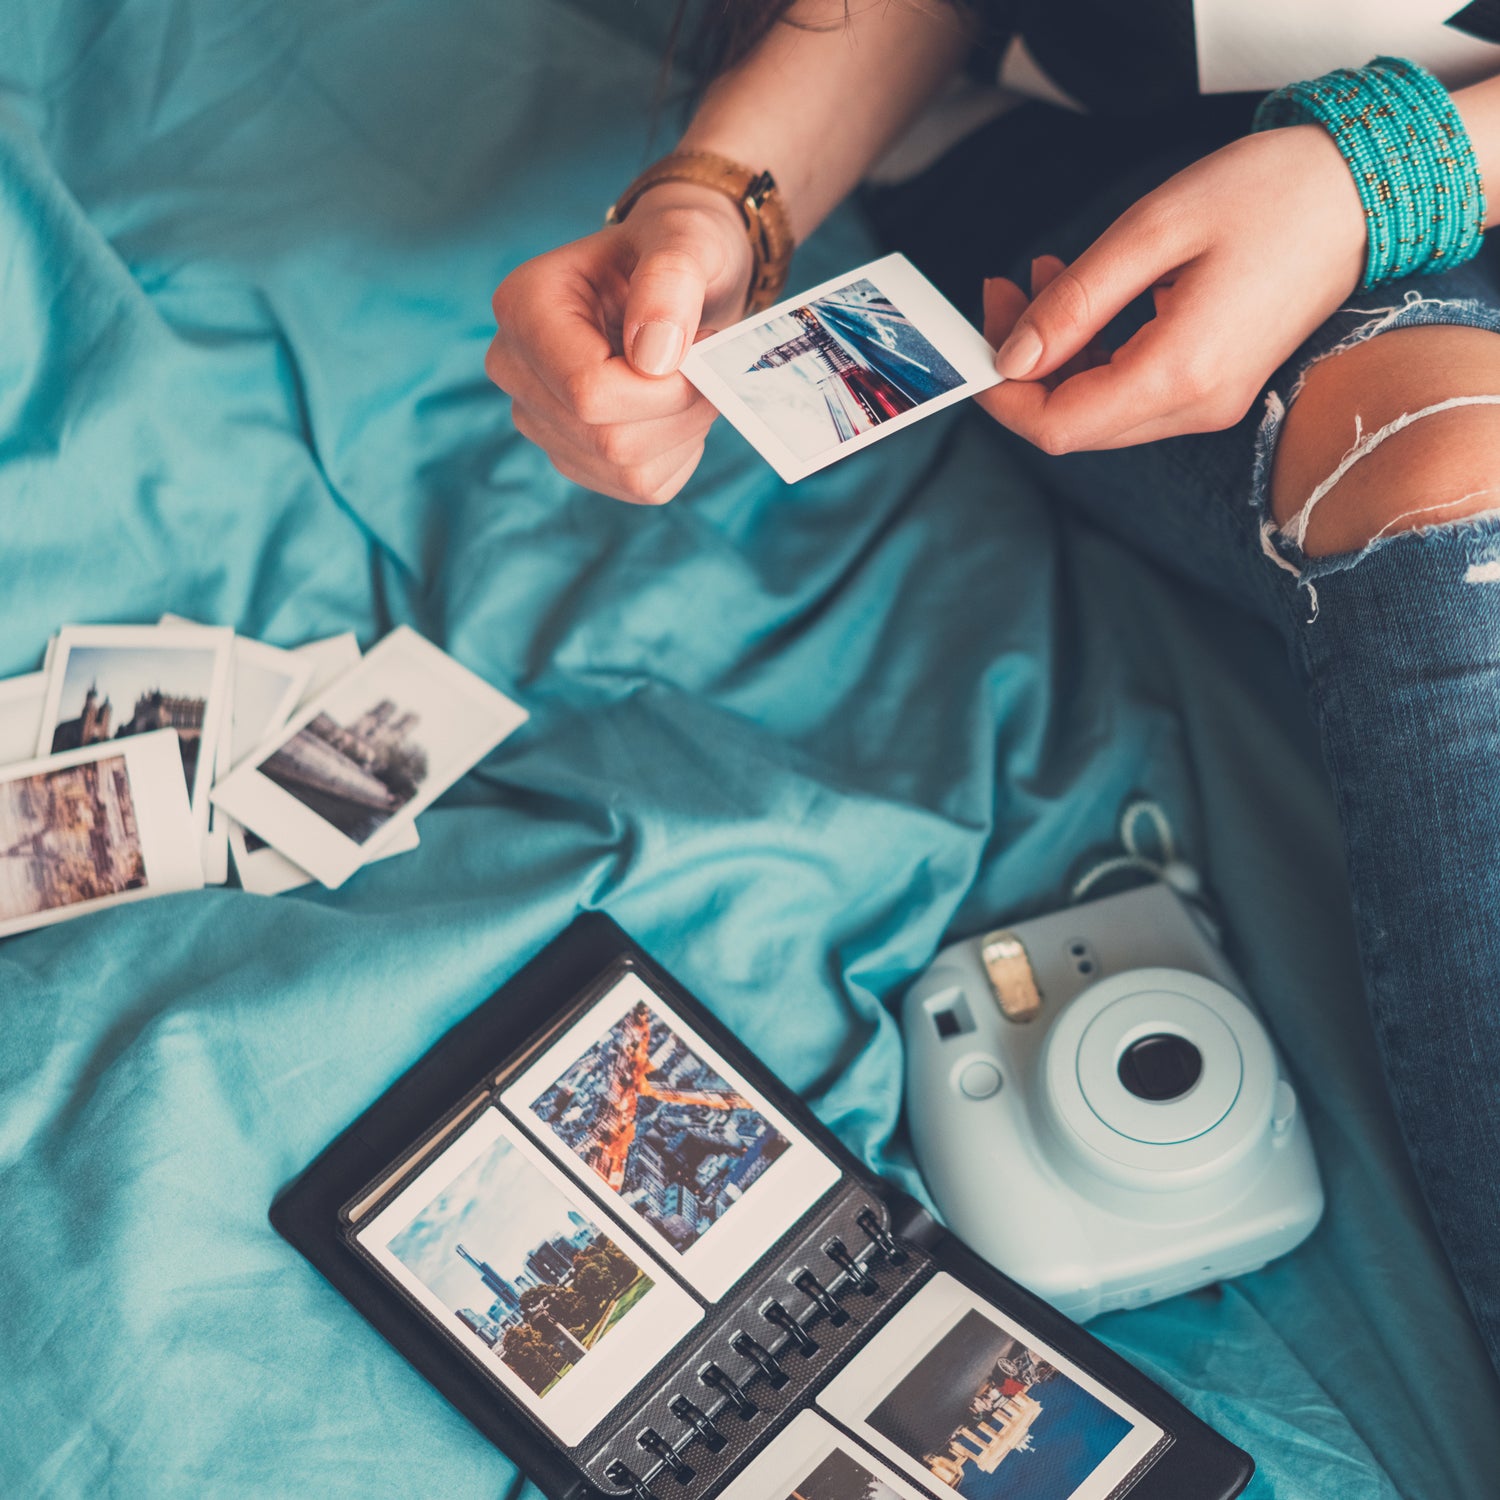 Why We Love the New Polaroid Snap